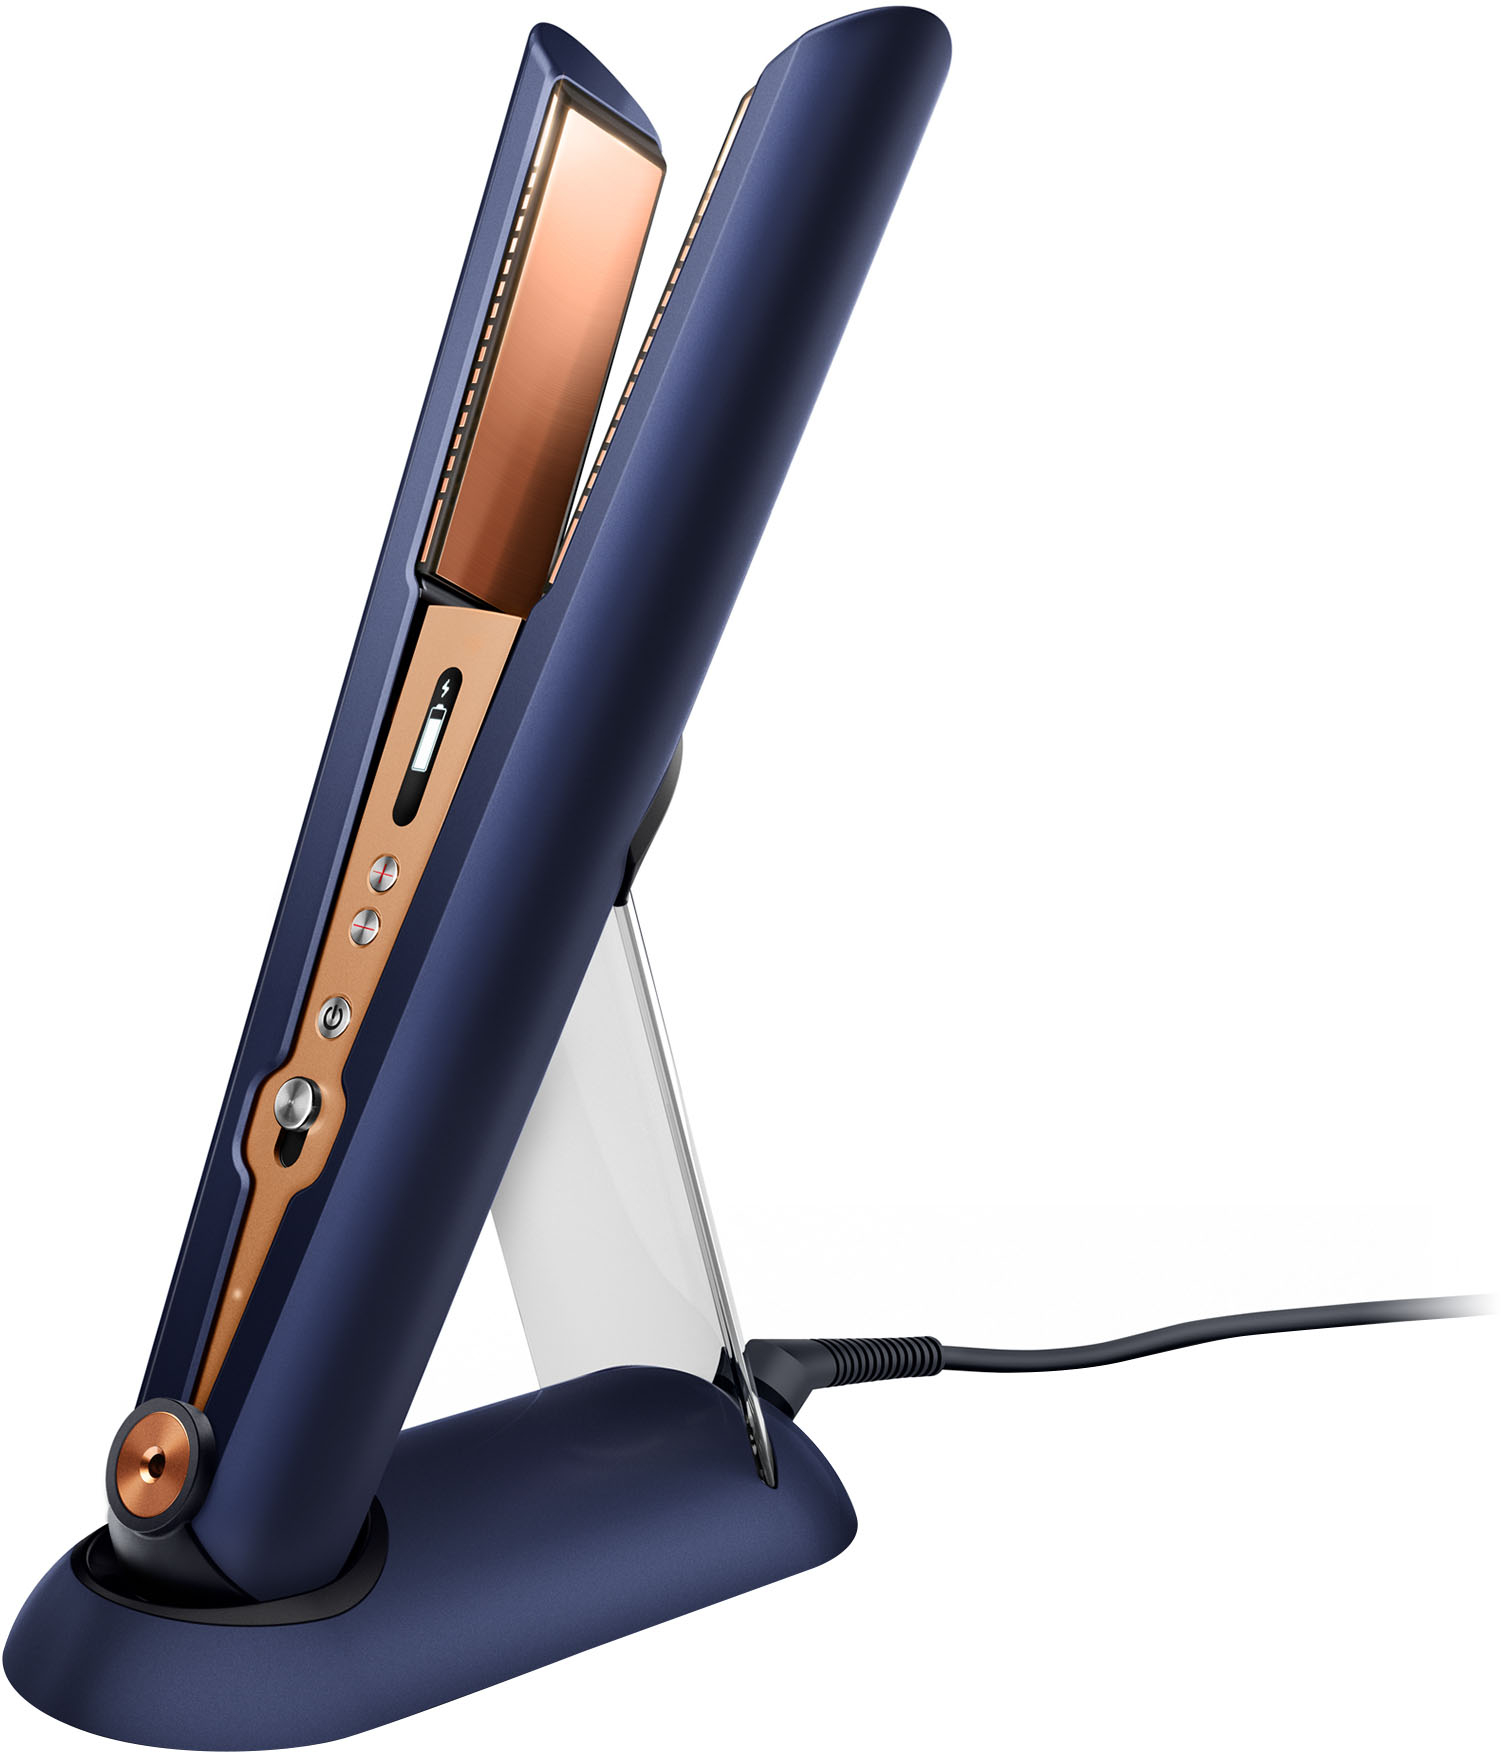 Dyson Corrale review: Is this 'hi-tech' hair straightener worth $500?